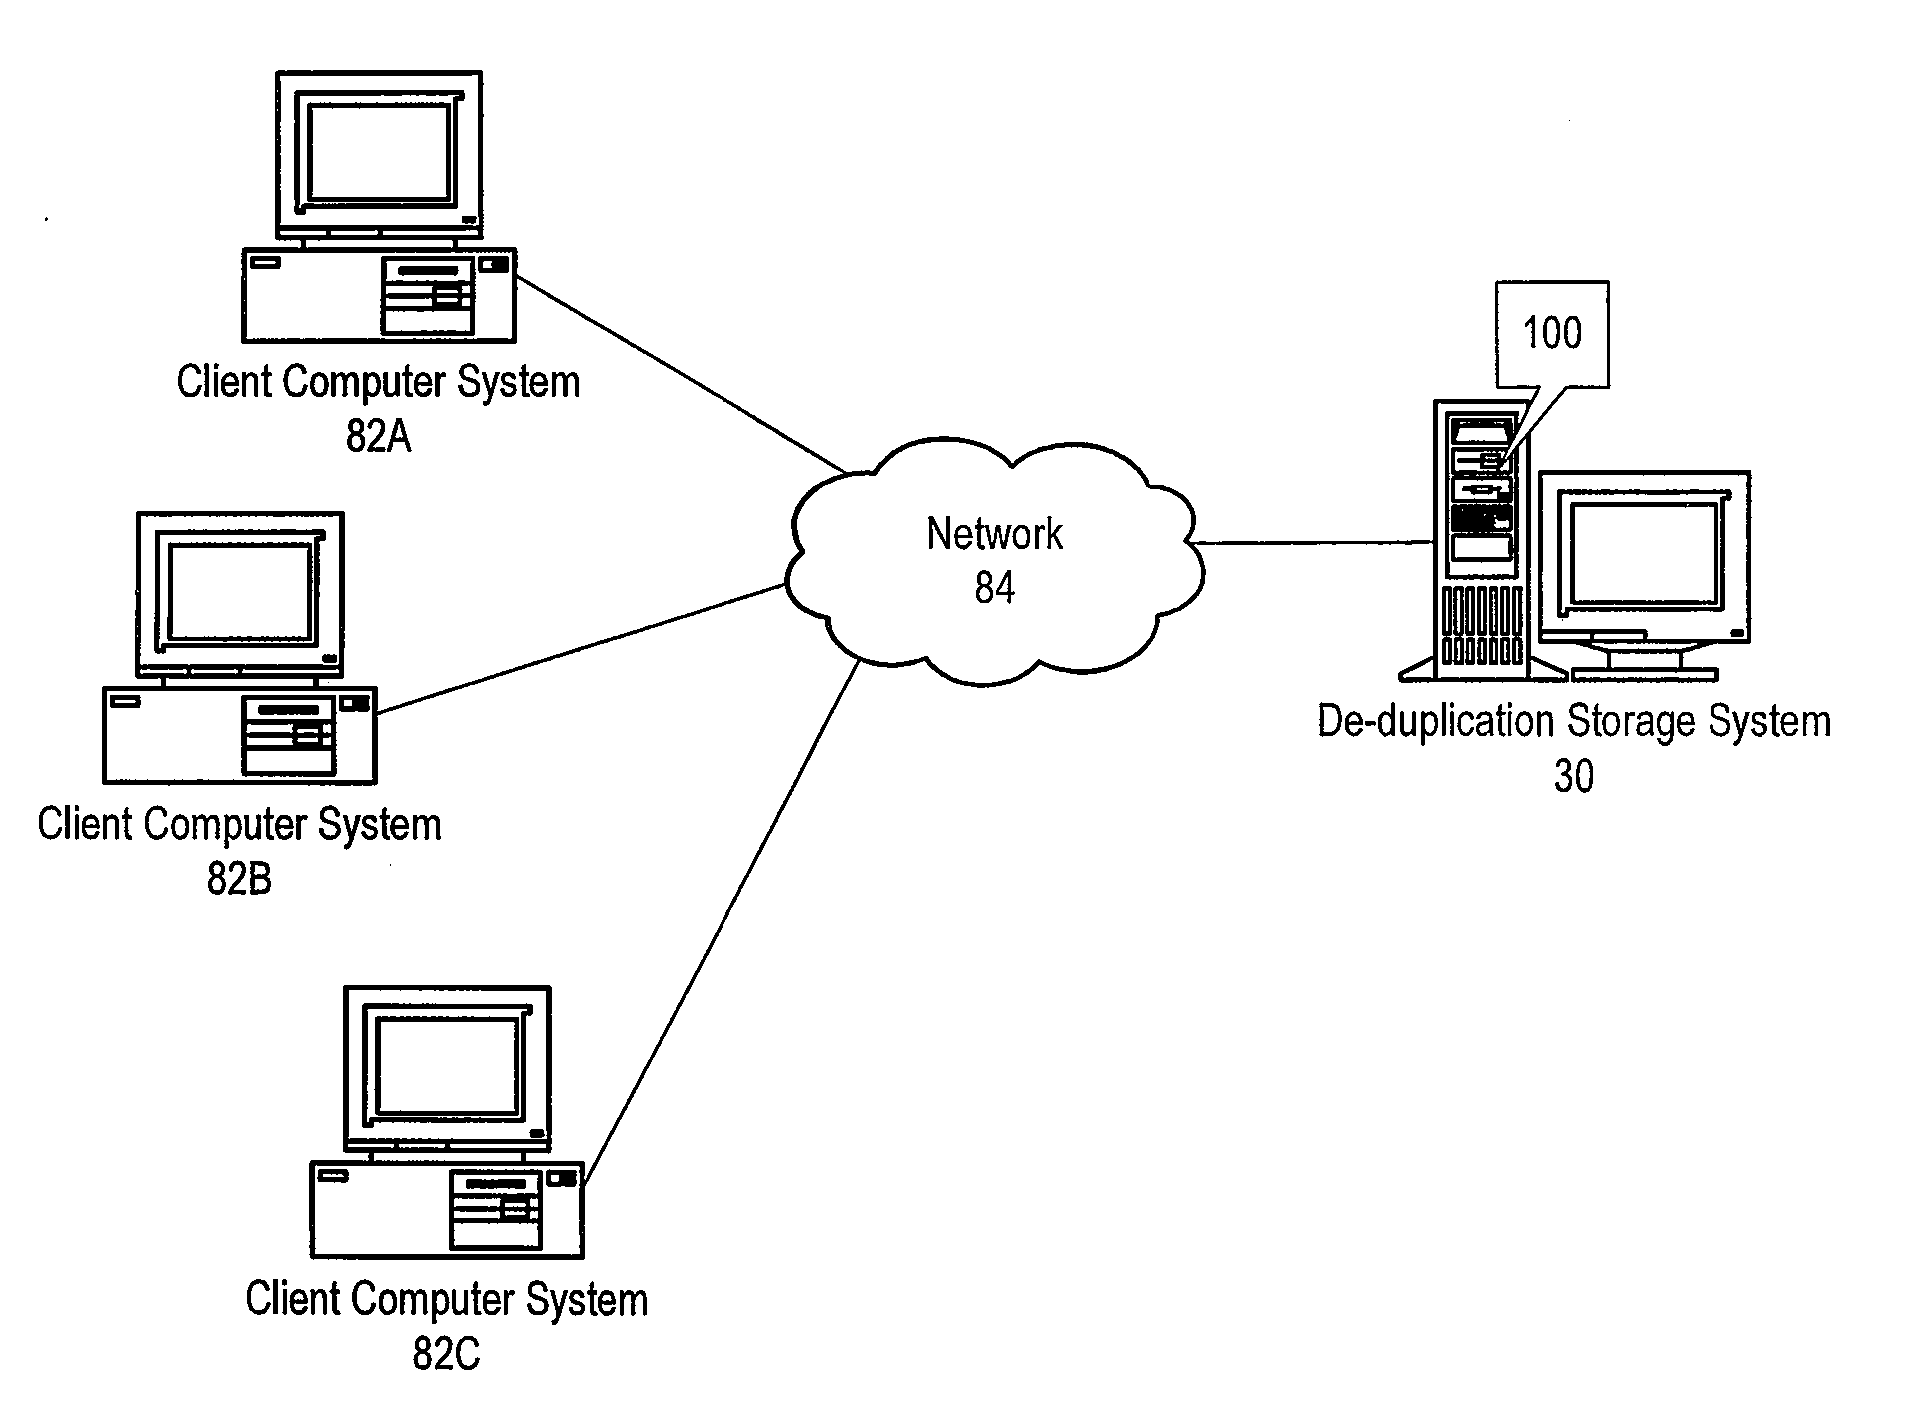 De-duplication Storage System with Multiple Indices for Efficient File Storage